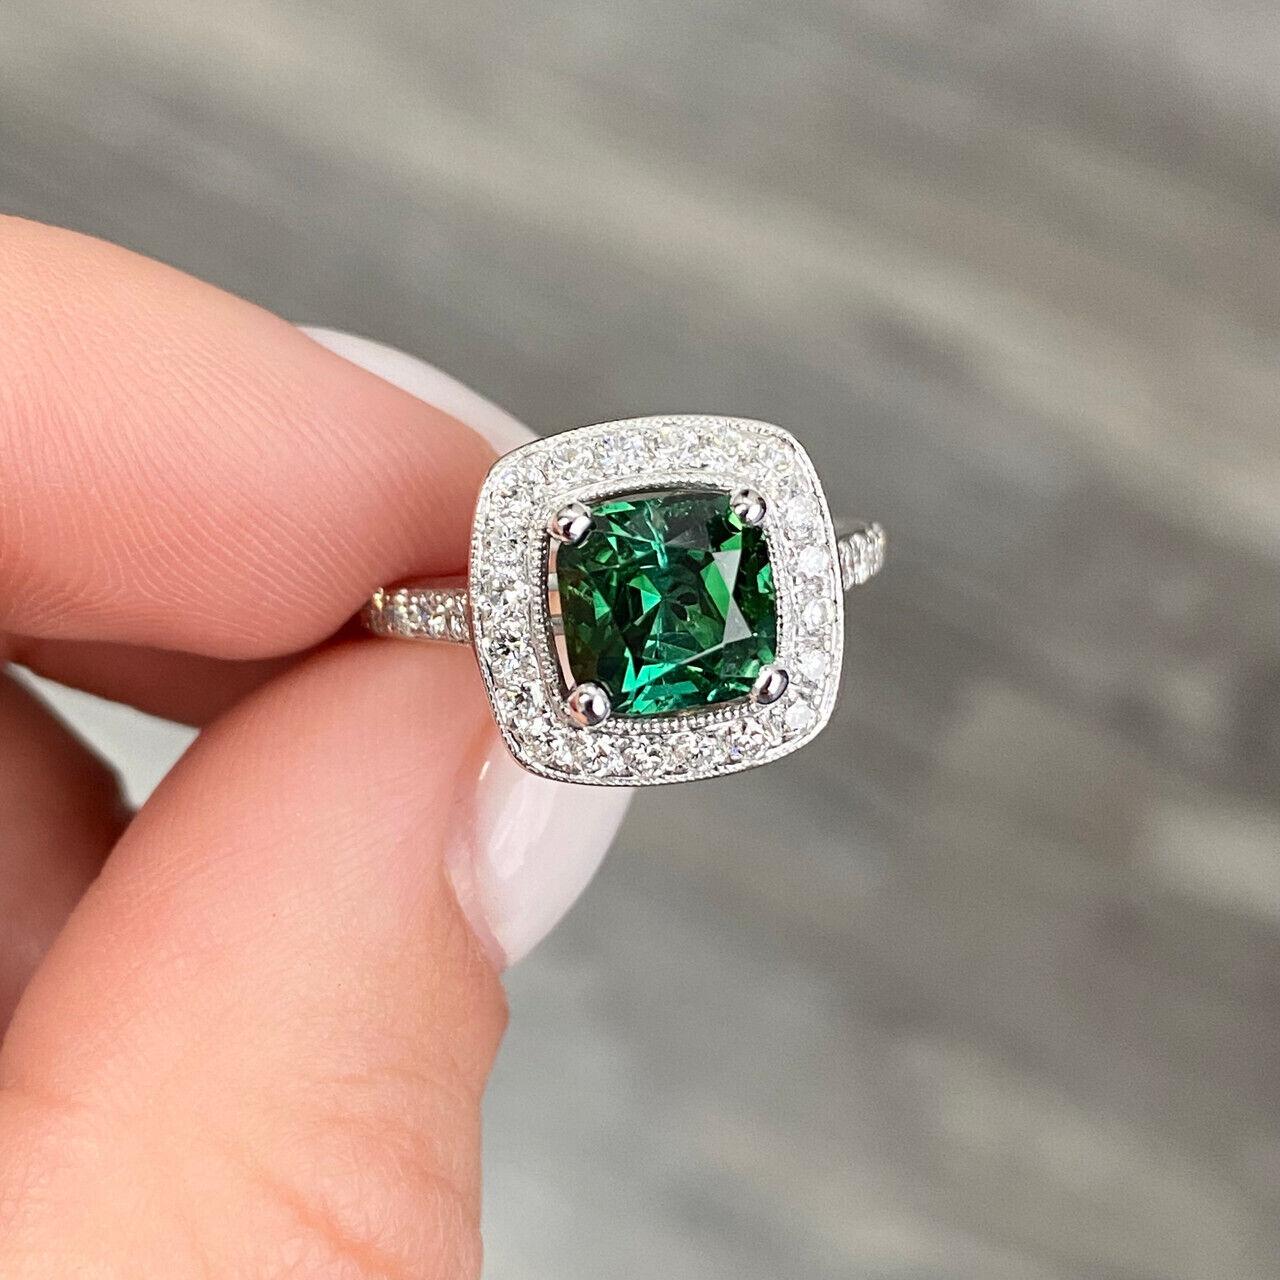 Specifications:
Pre-Owned (Great condition)
Metal: 14K White Gold
Weight: 4.1 Gr
Main Stone: 1.91 ct Green Tourmaline
Side Stones: Diamonds
Carat Total Weight: 0.40 ctw
Color: G
Clarity: VS-SI1
Size: 4.5 US
inside balls can be removed and sized to